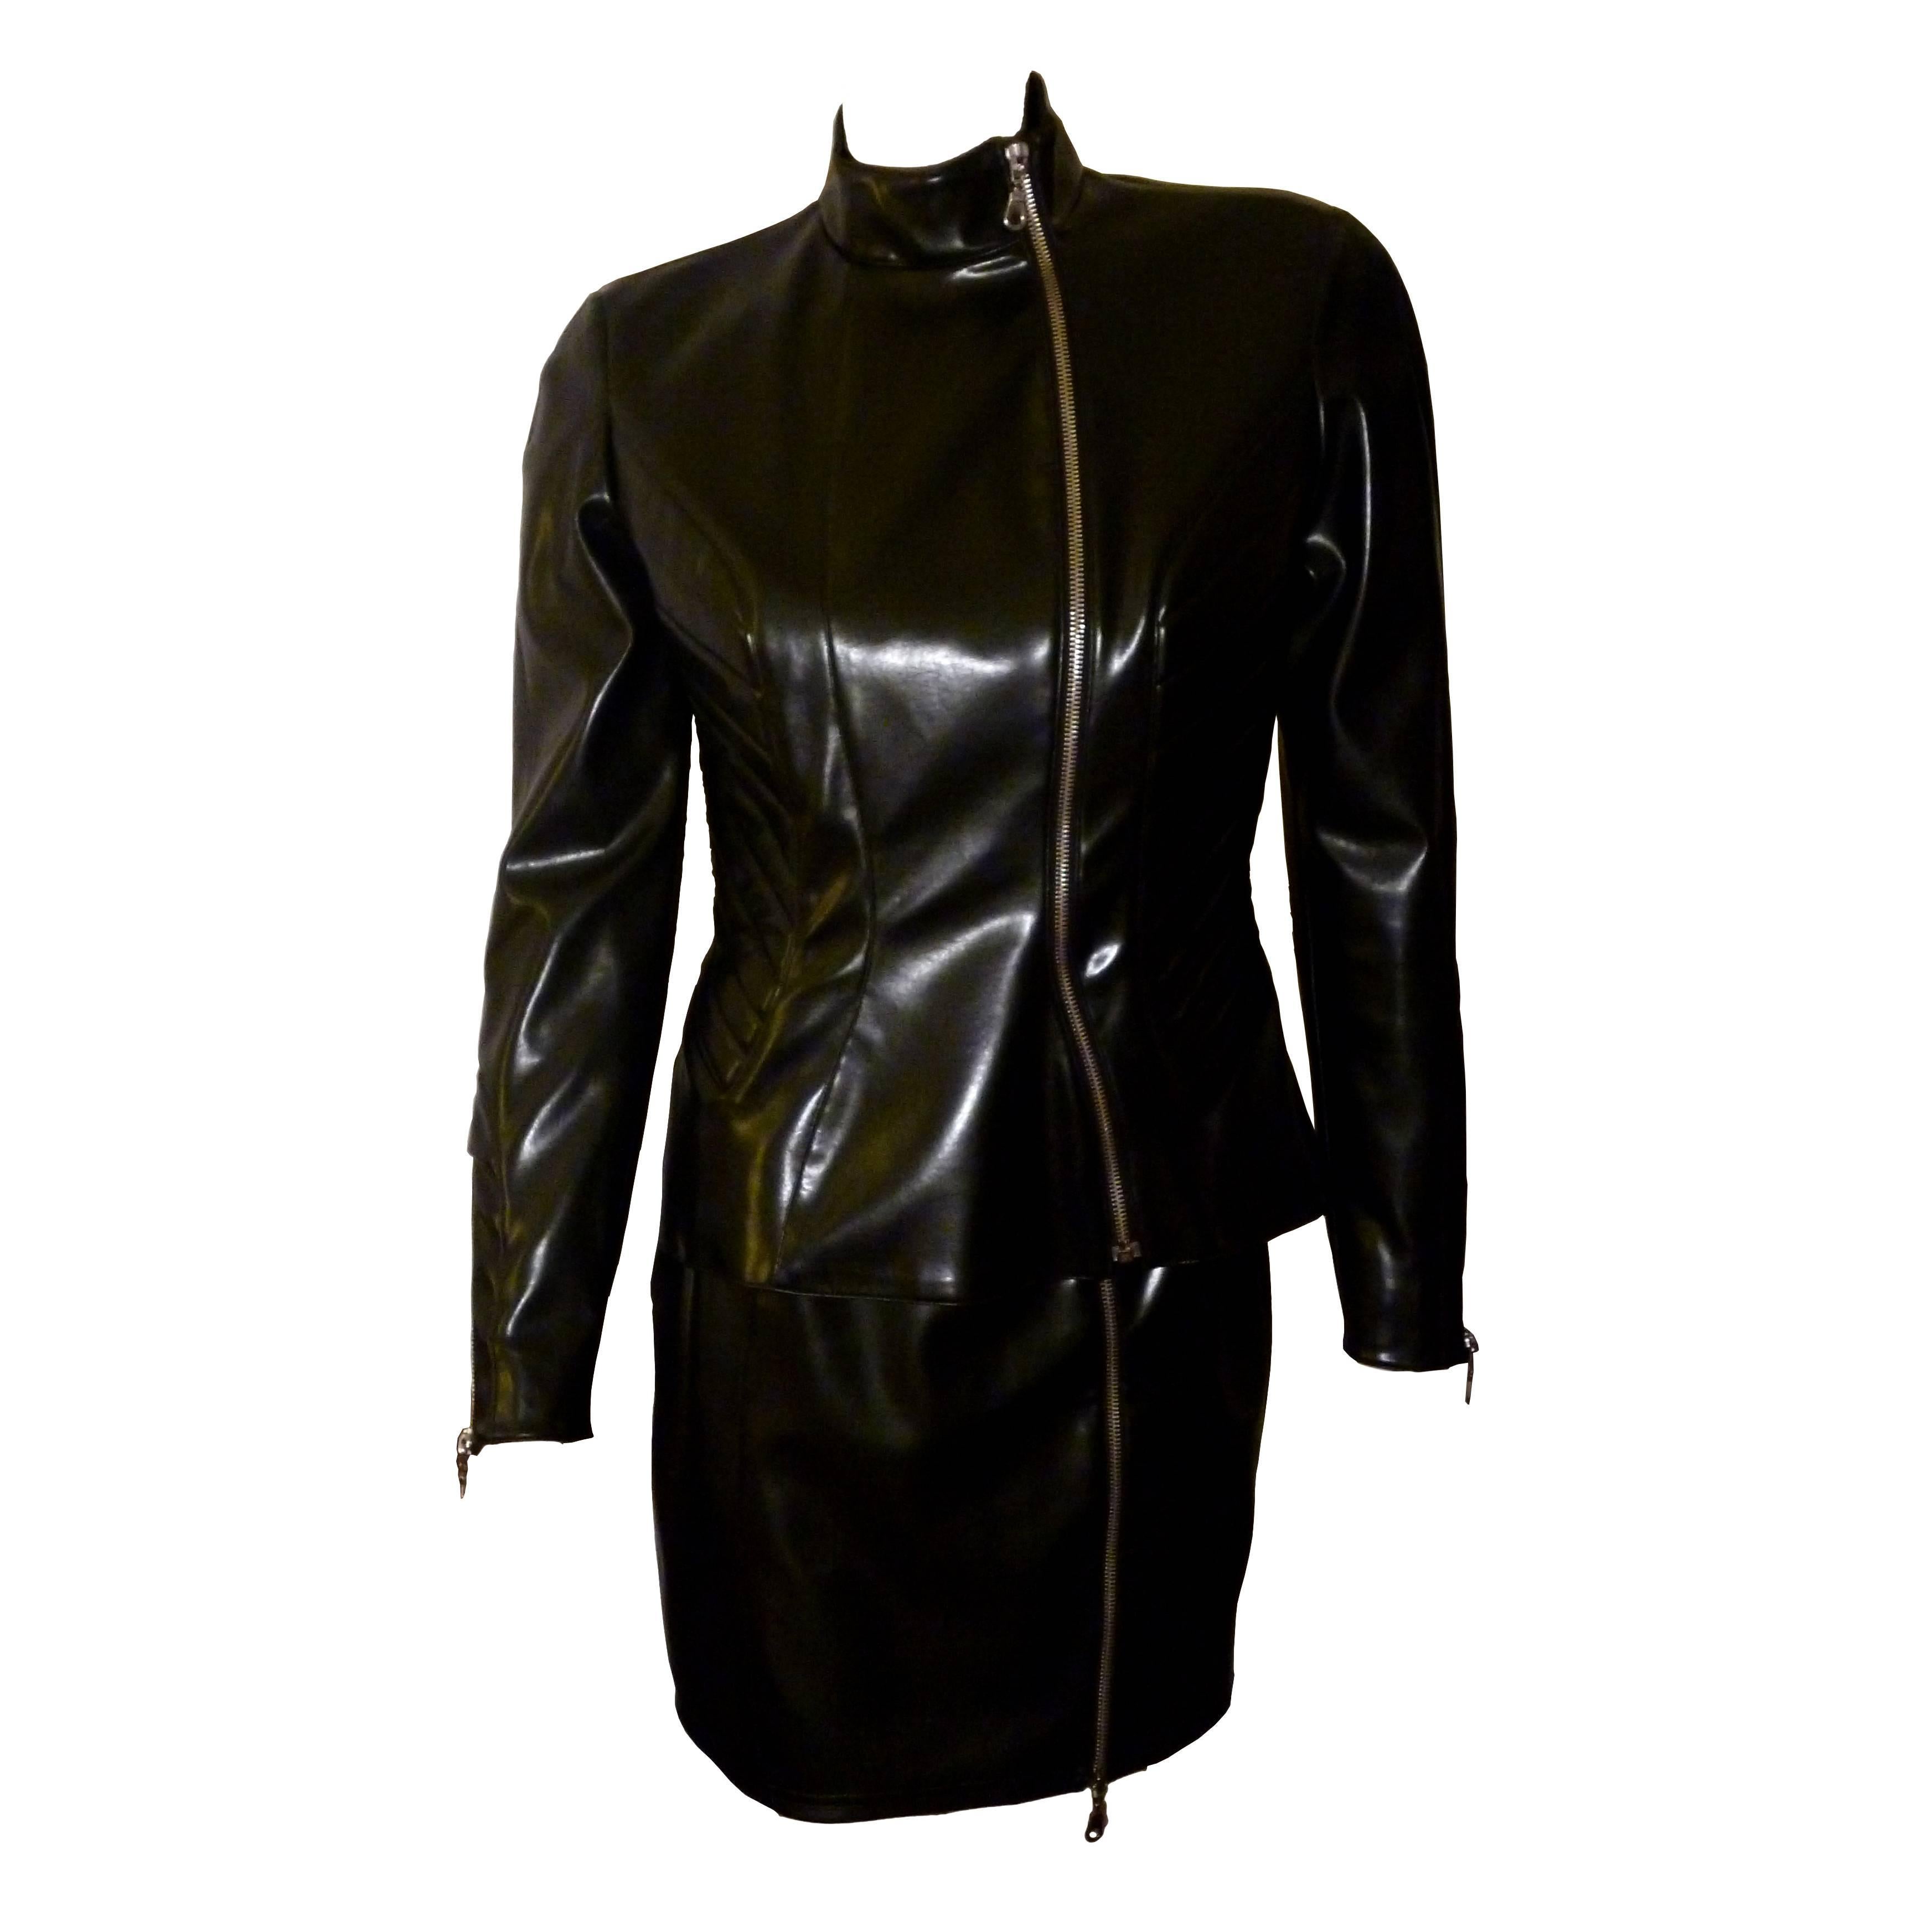 Thierry Mugler Vintage Black Rubber Jacket and Skirt Suit